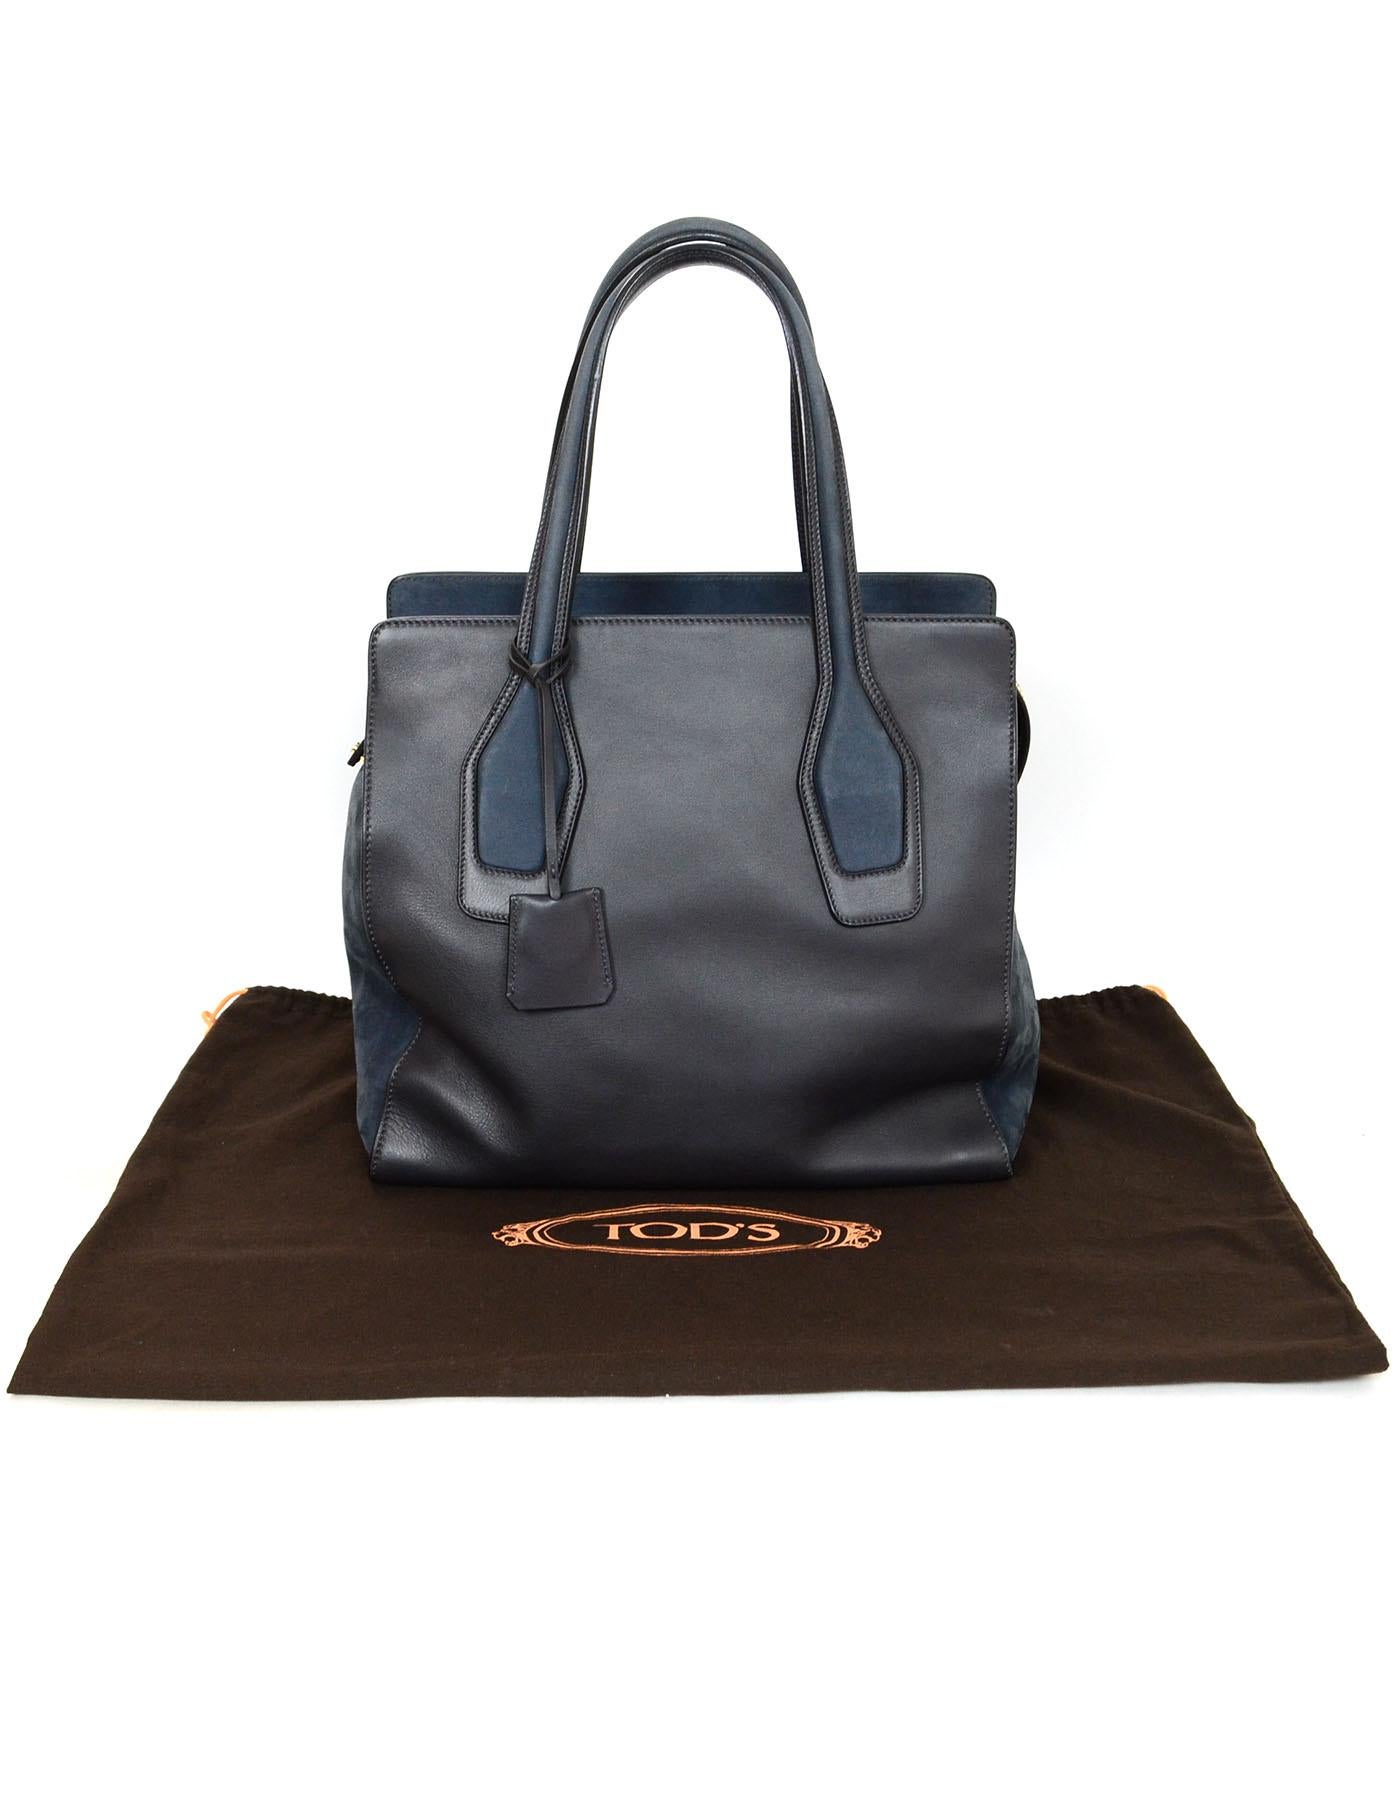 Tod's Black Leather & Navy Suede Tote Bag with Dust Bag 4